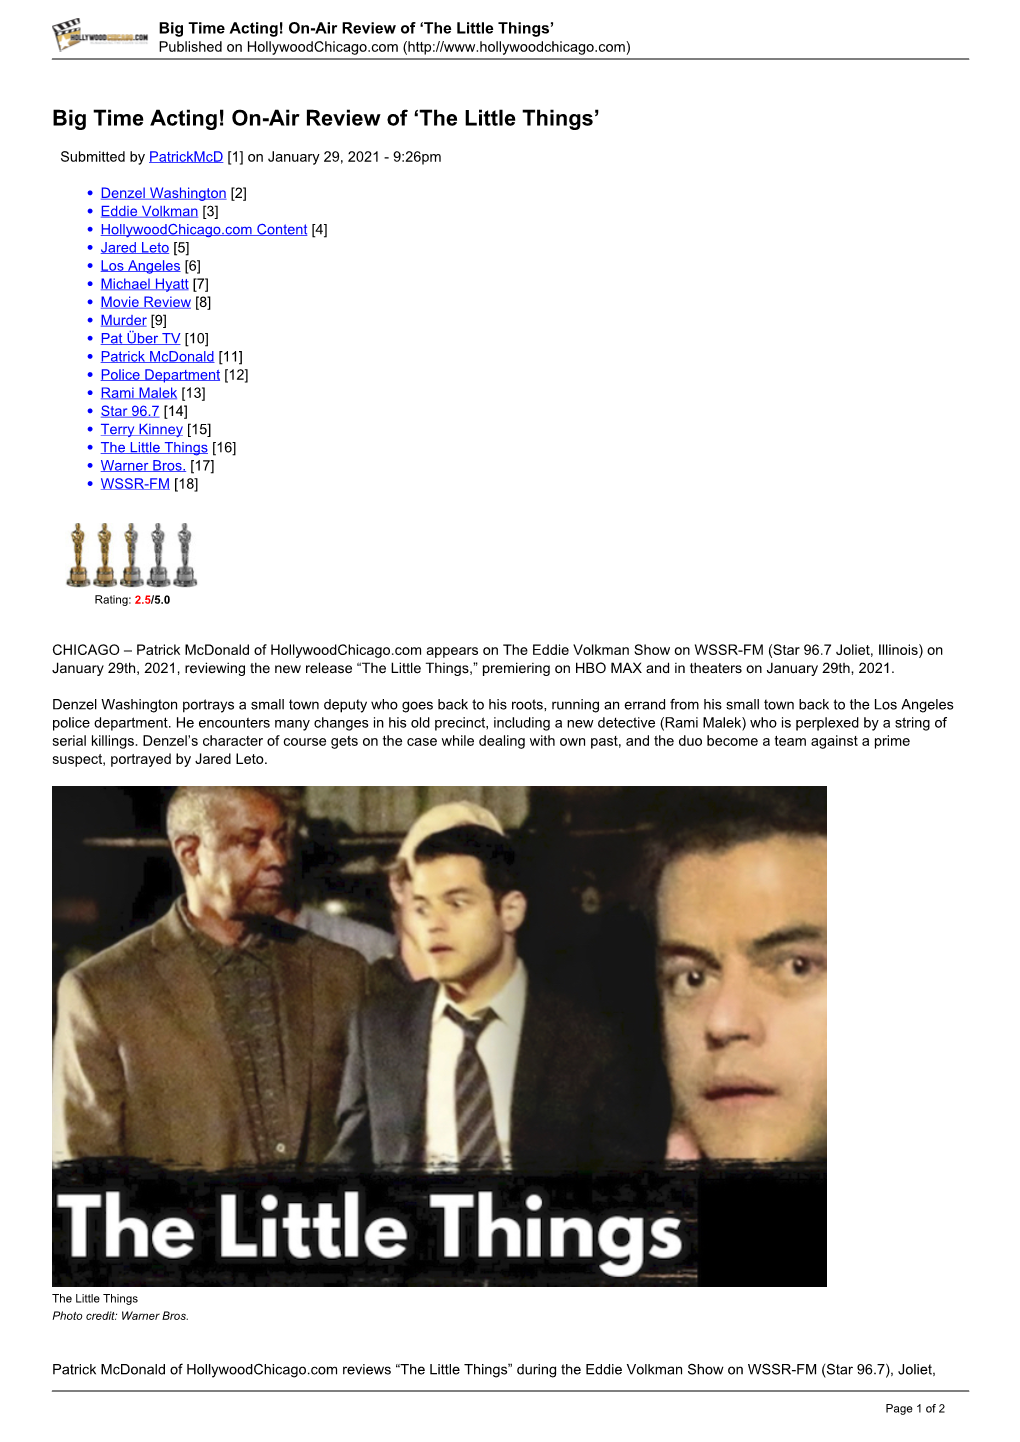 Big Time Acting! On-Air Review of 'The Little Things'